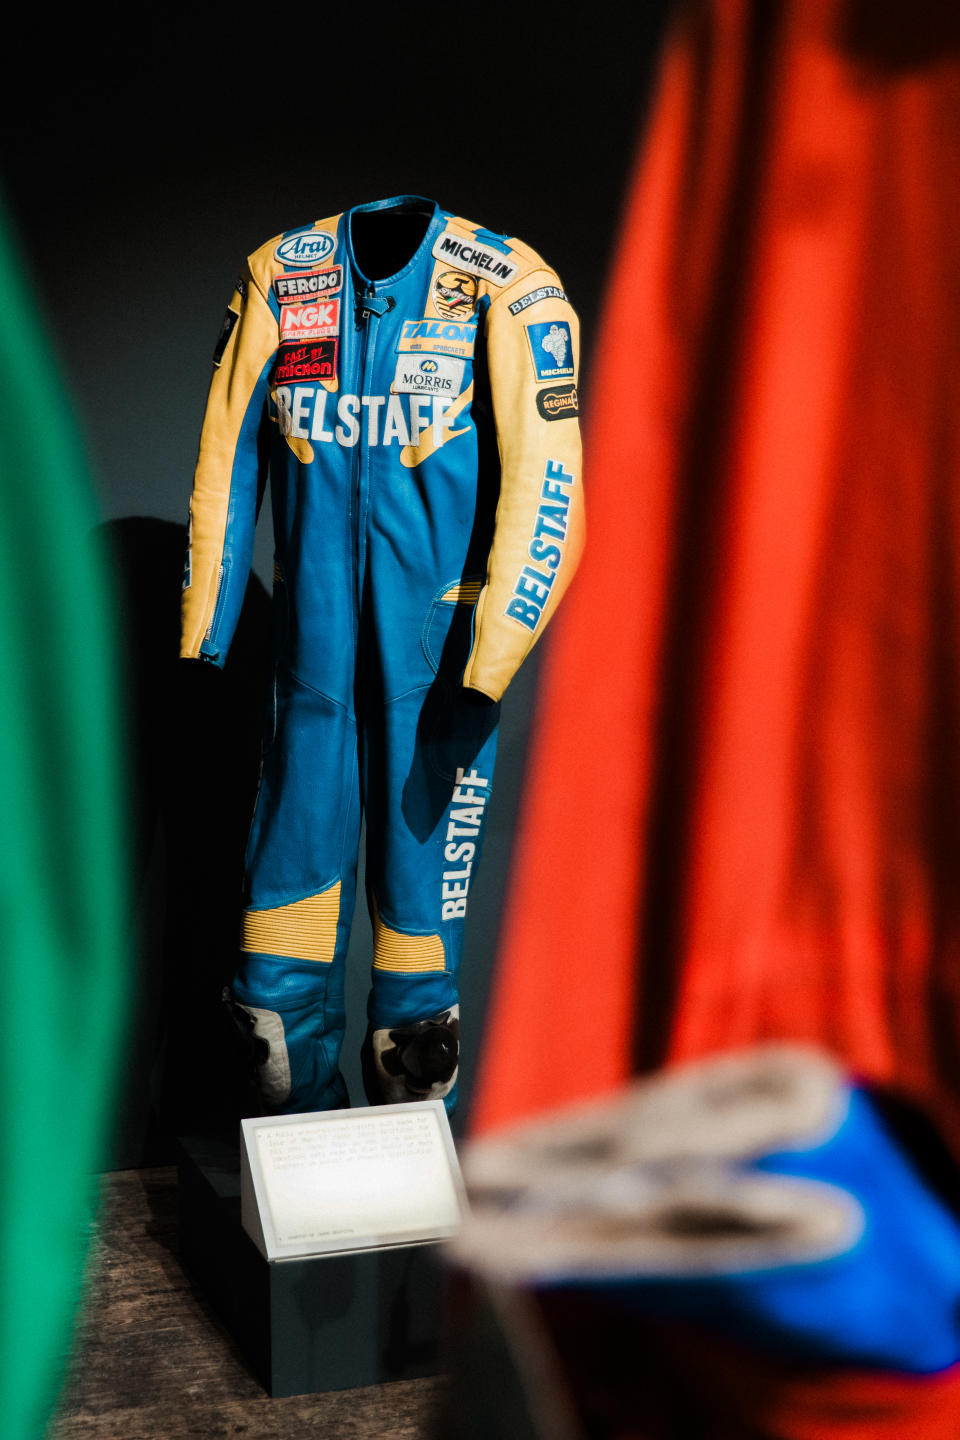 Belstaff early 2000s racing suit at the archive exhibition. 